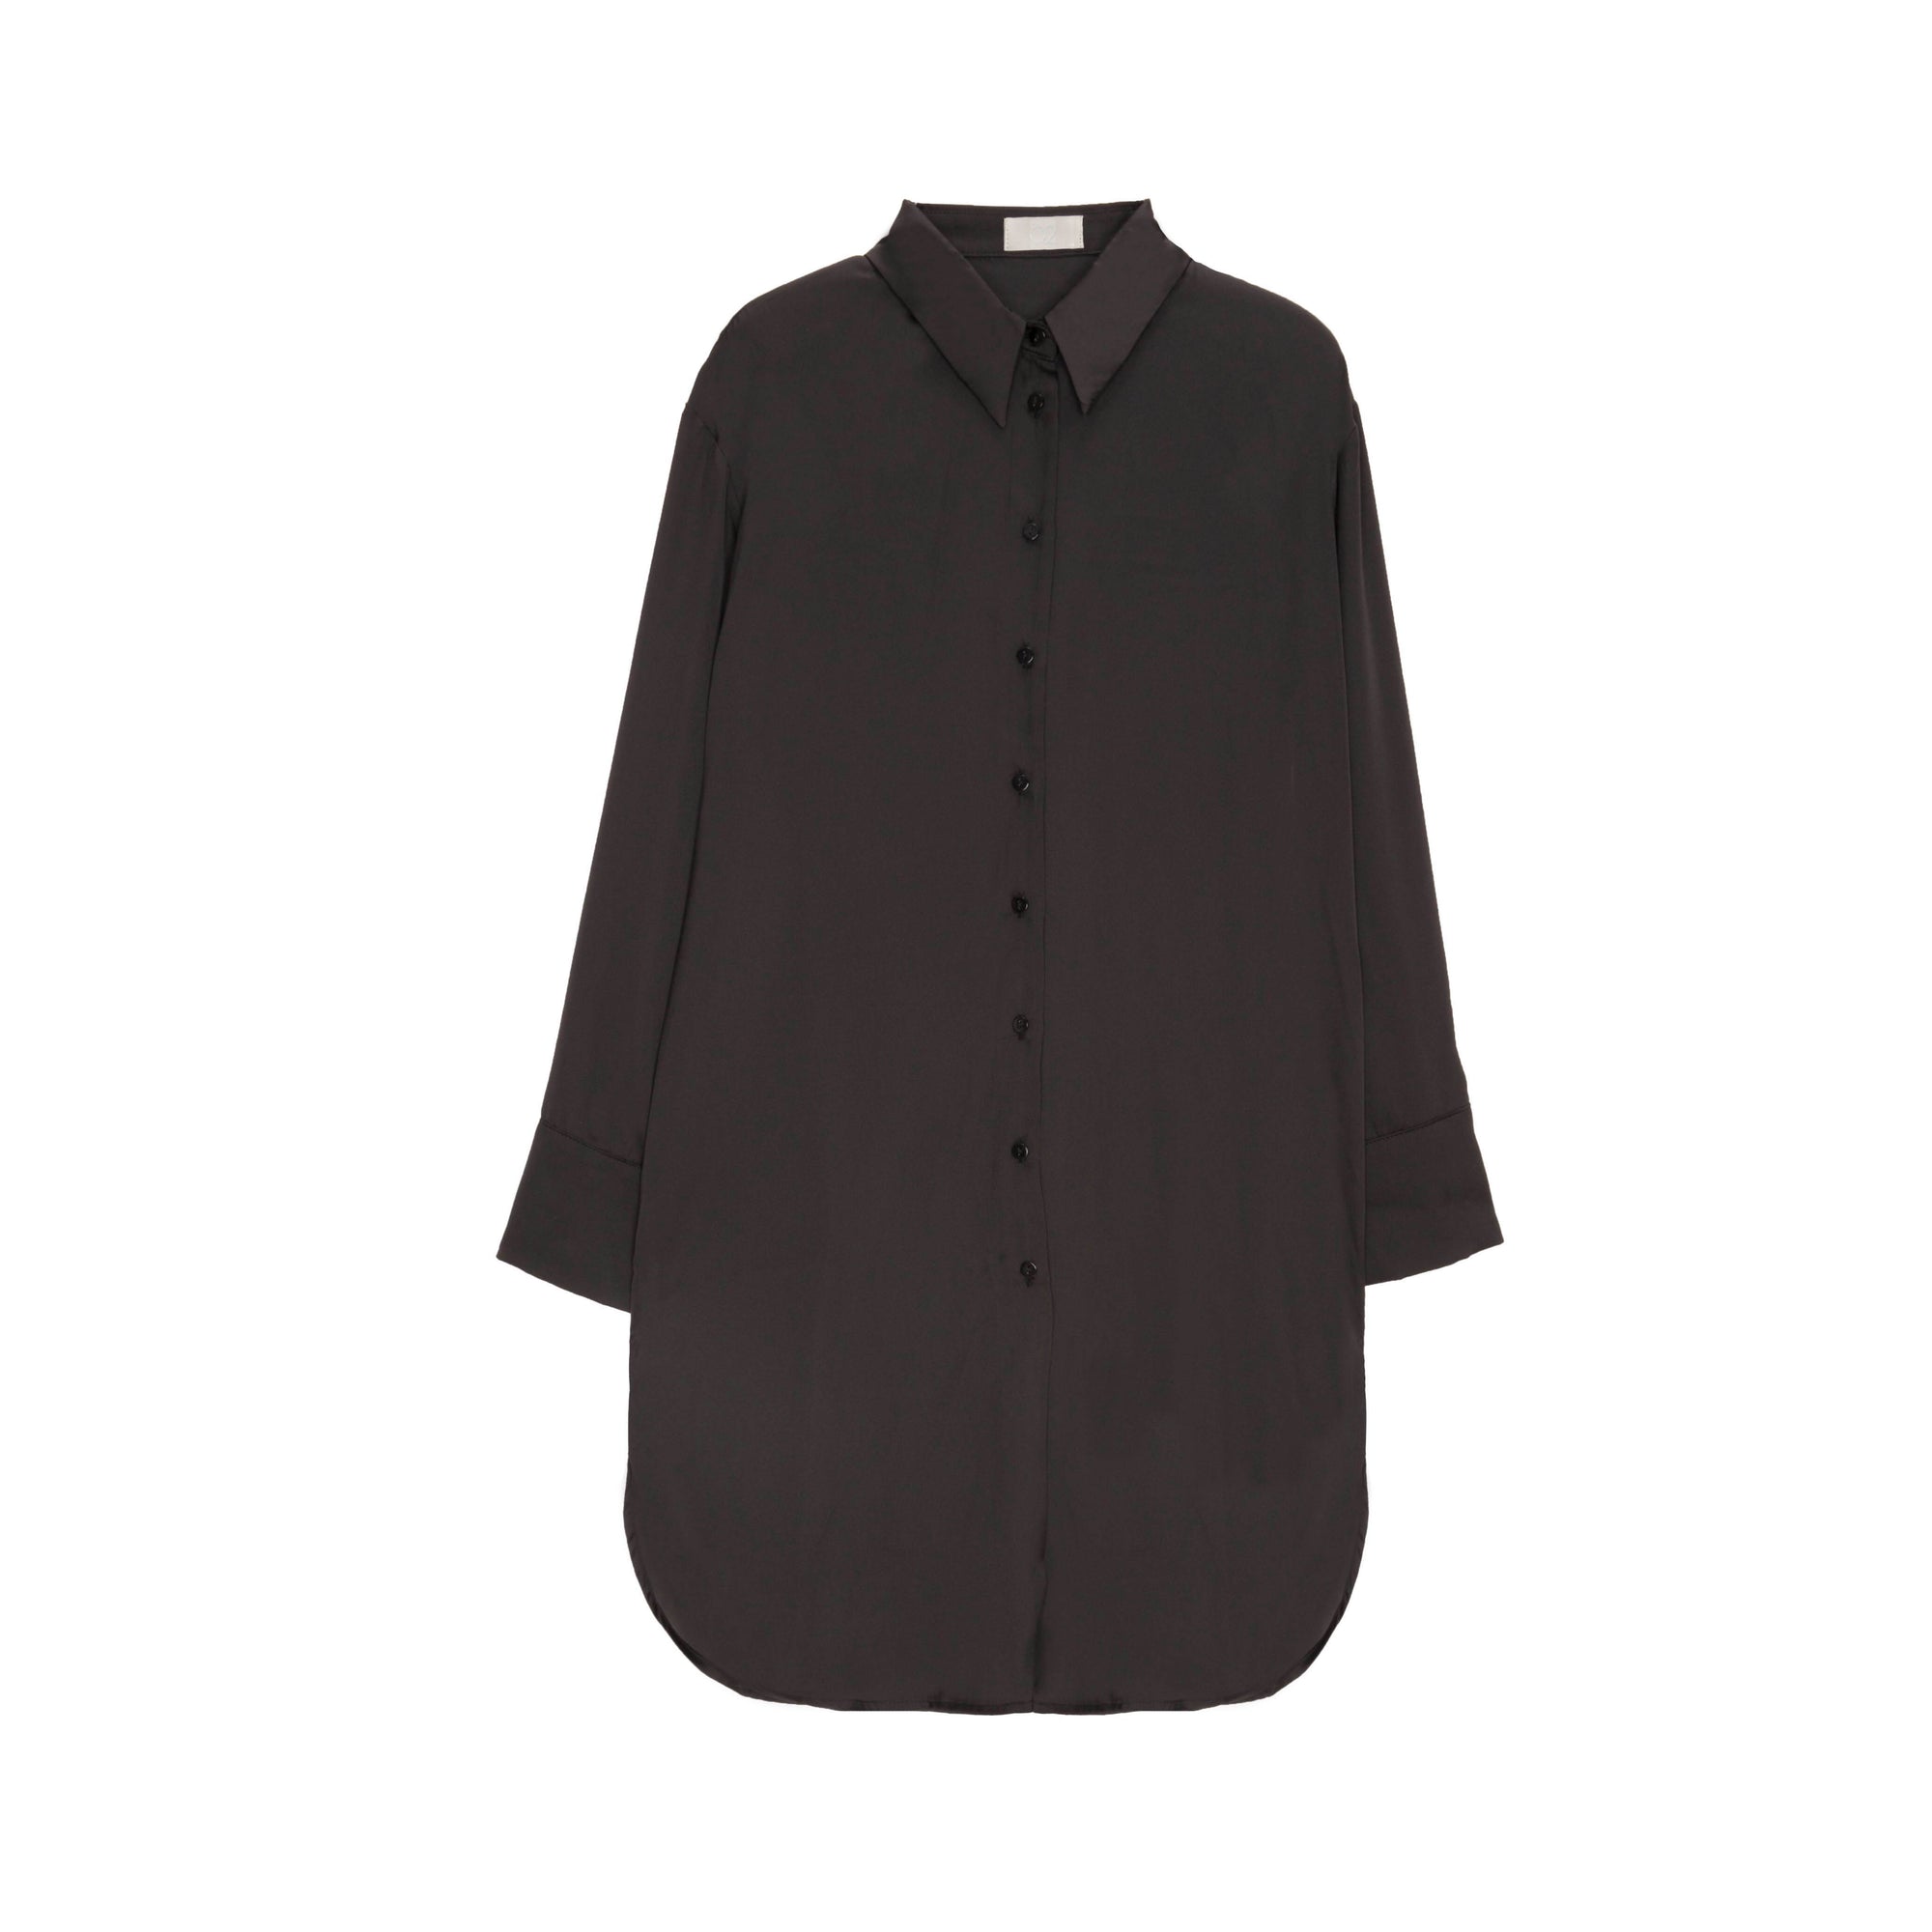 Long sleeve satin button front shirt in black